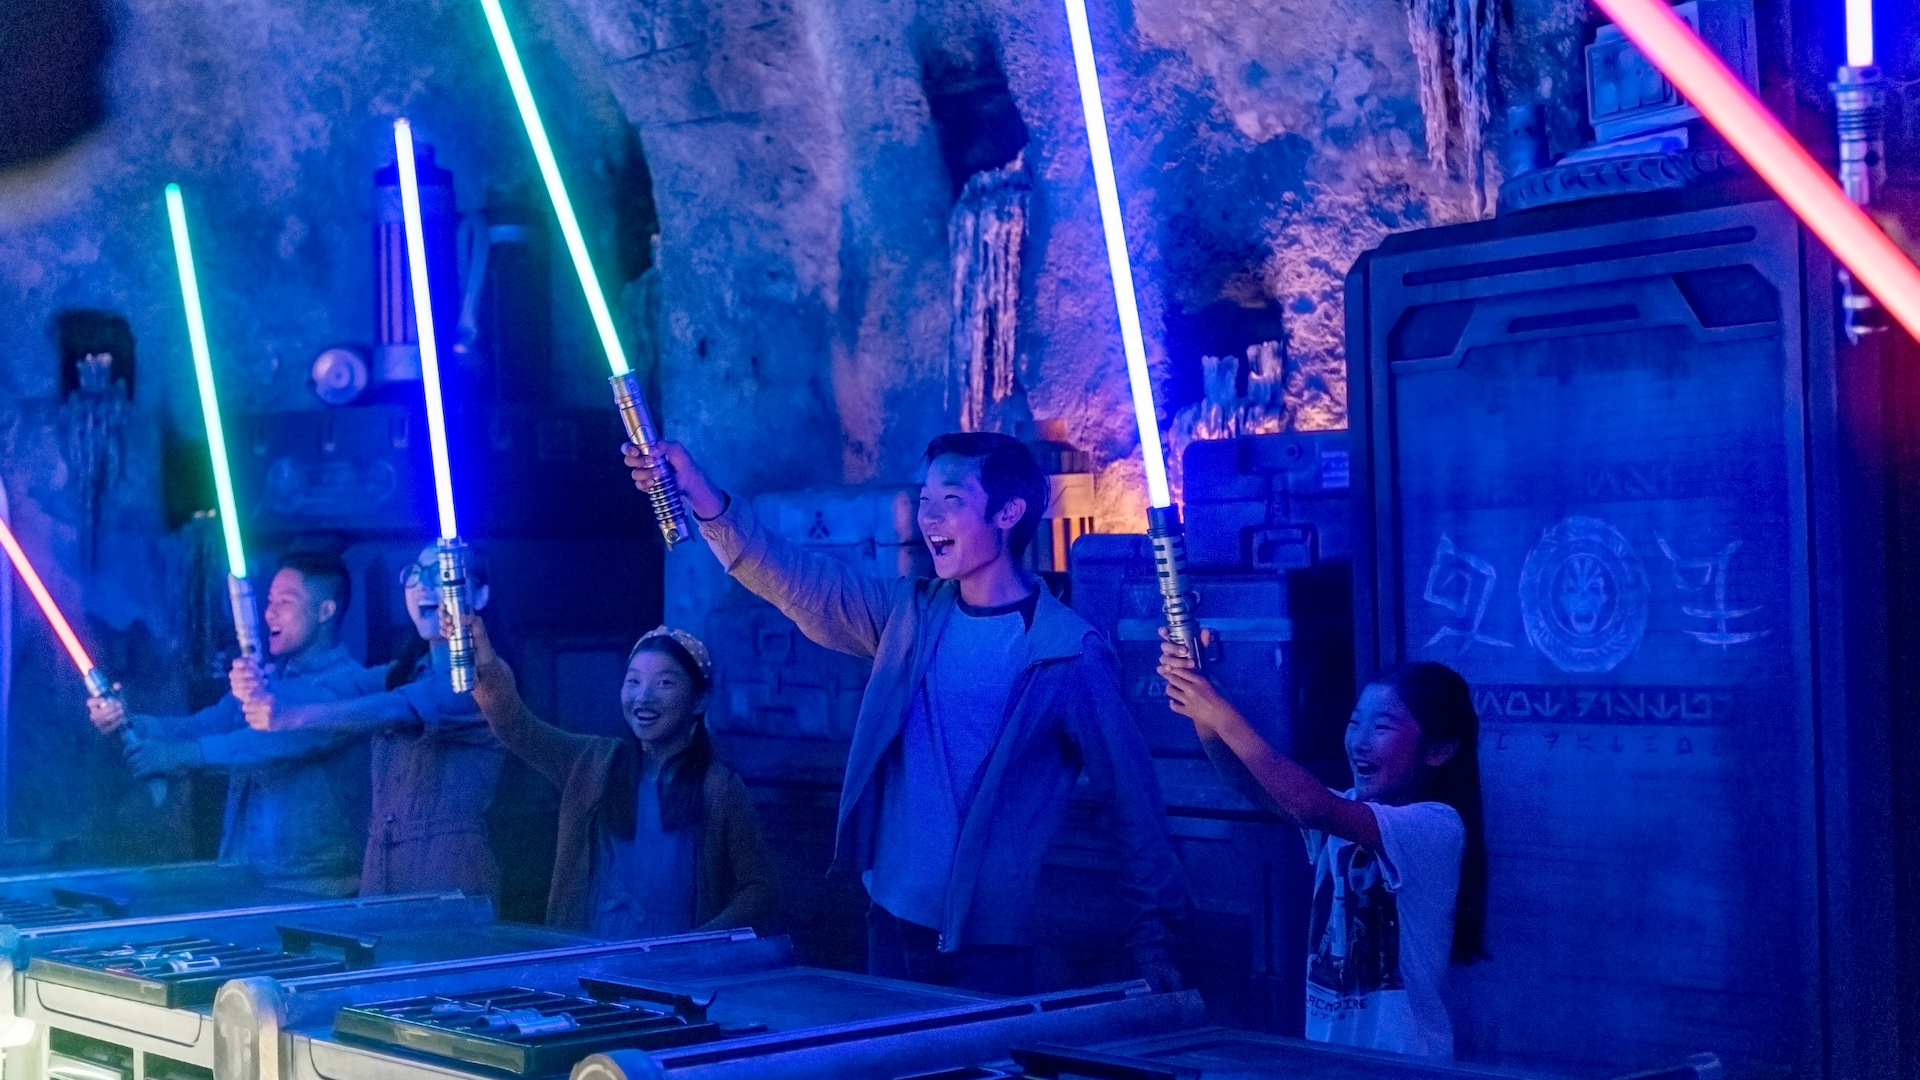 A family reacts with joy as their newly constructed lightsabers illuminate inside of metal cylinders for the first time